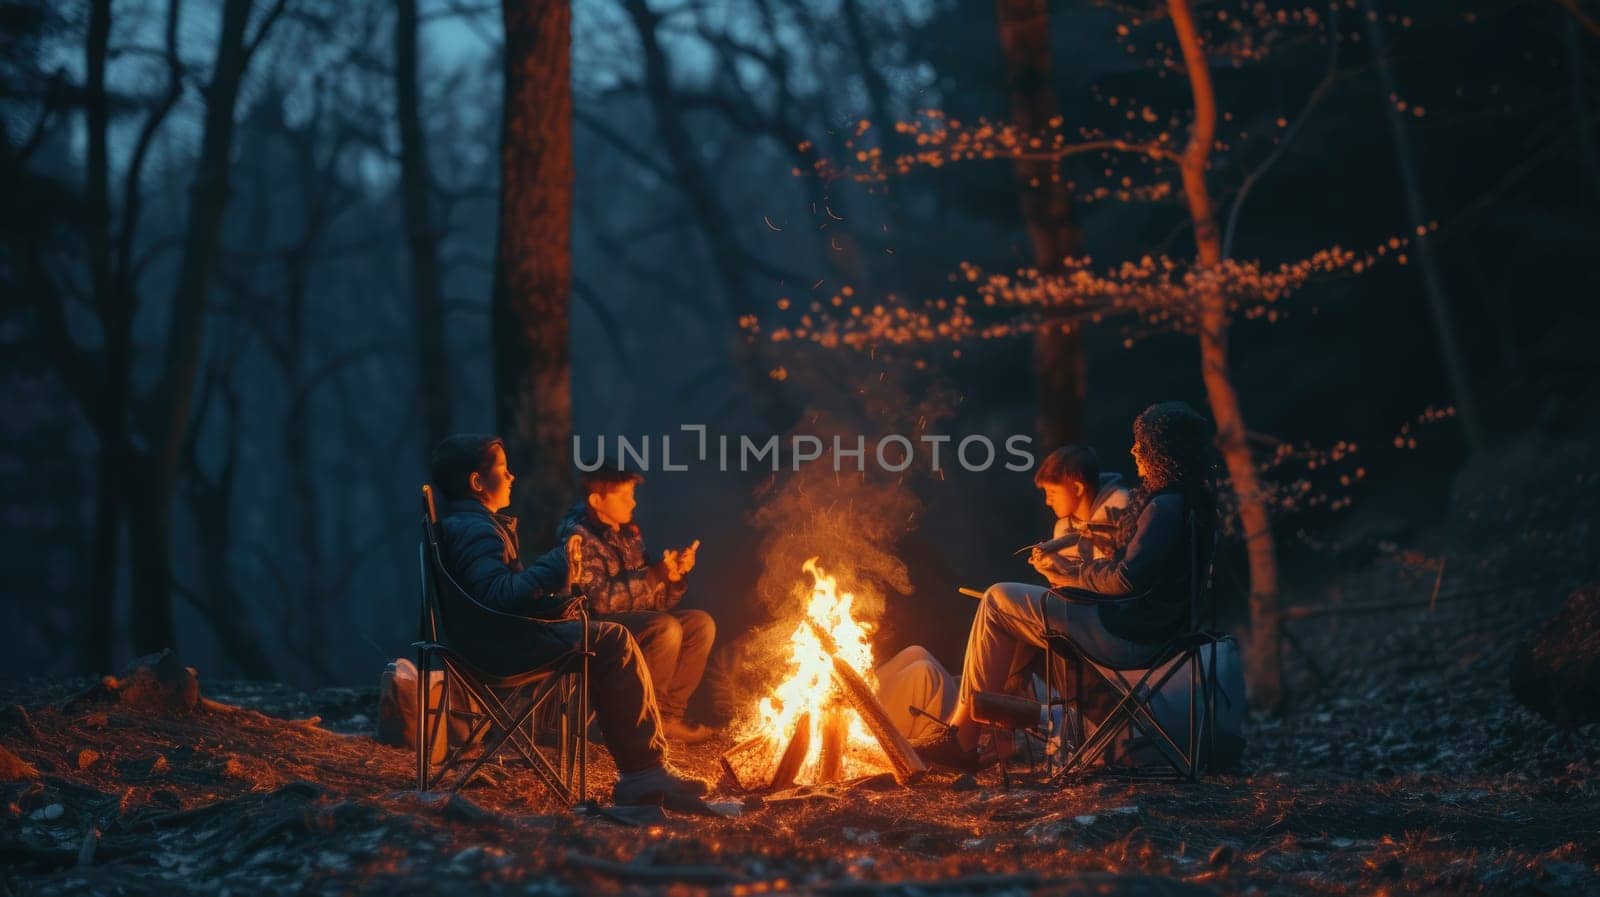 A fun camping event with a group of people sitting around a tent, enjoying the warmth of a fire, amidst the beautiful forest landscape. AIG41